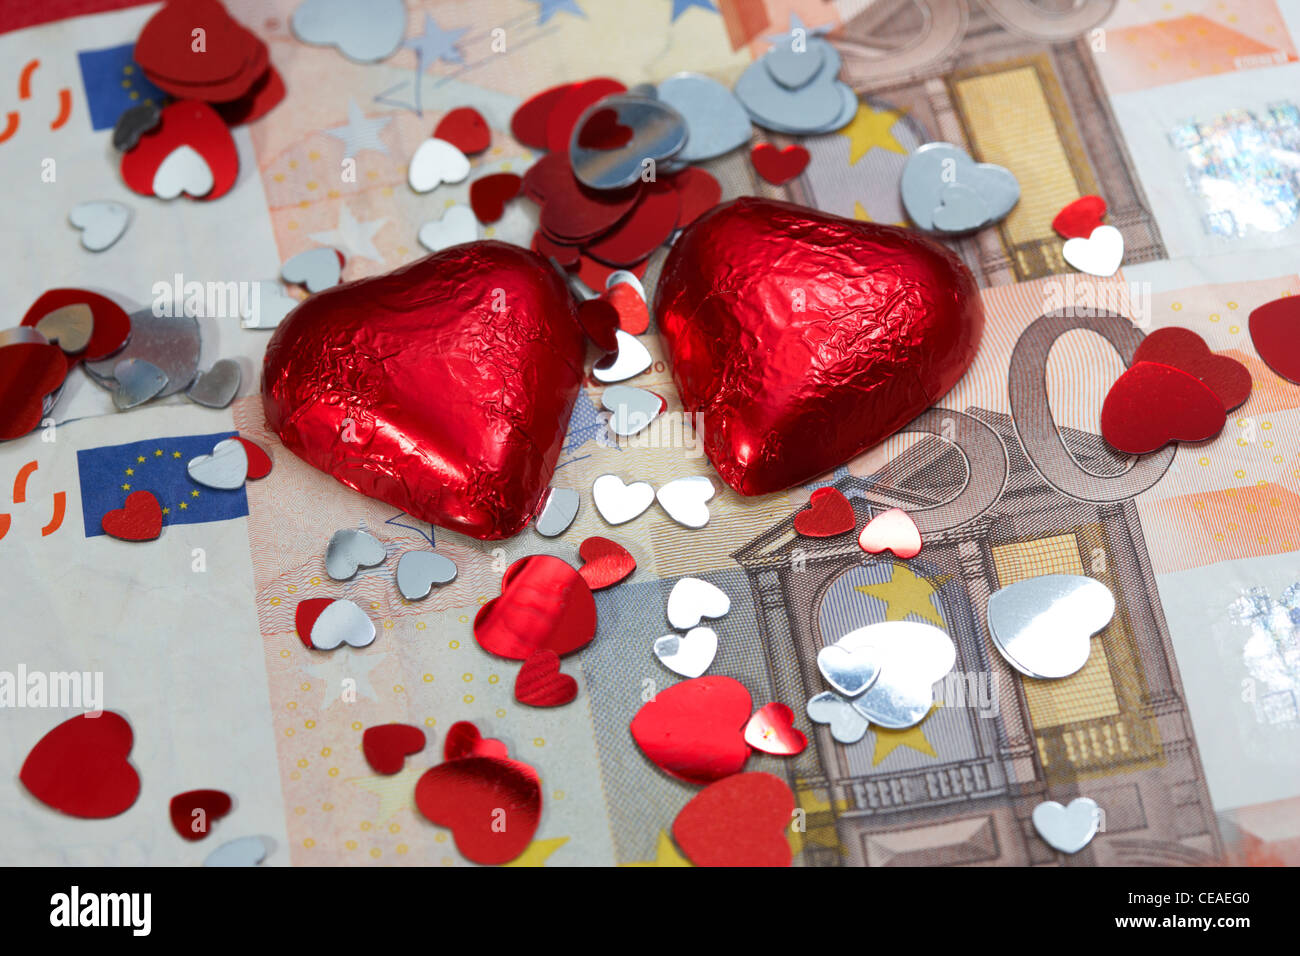 chocolate hearts and decorations on euros cash Stock Photo